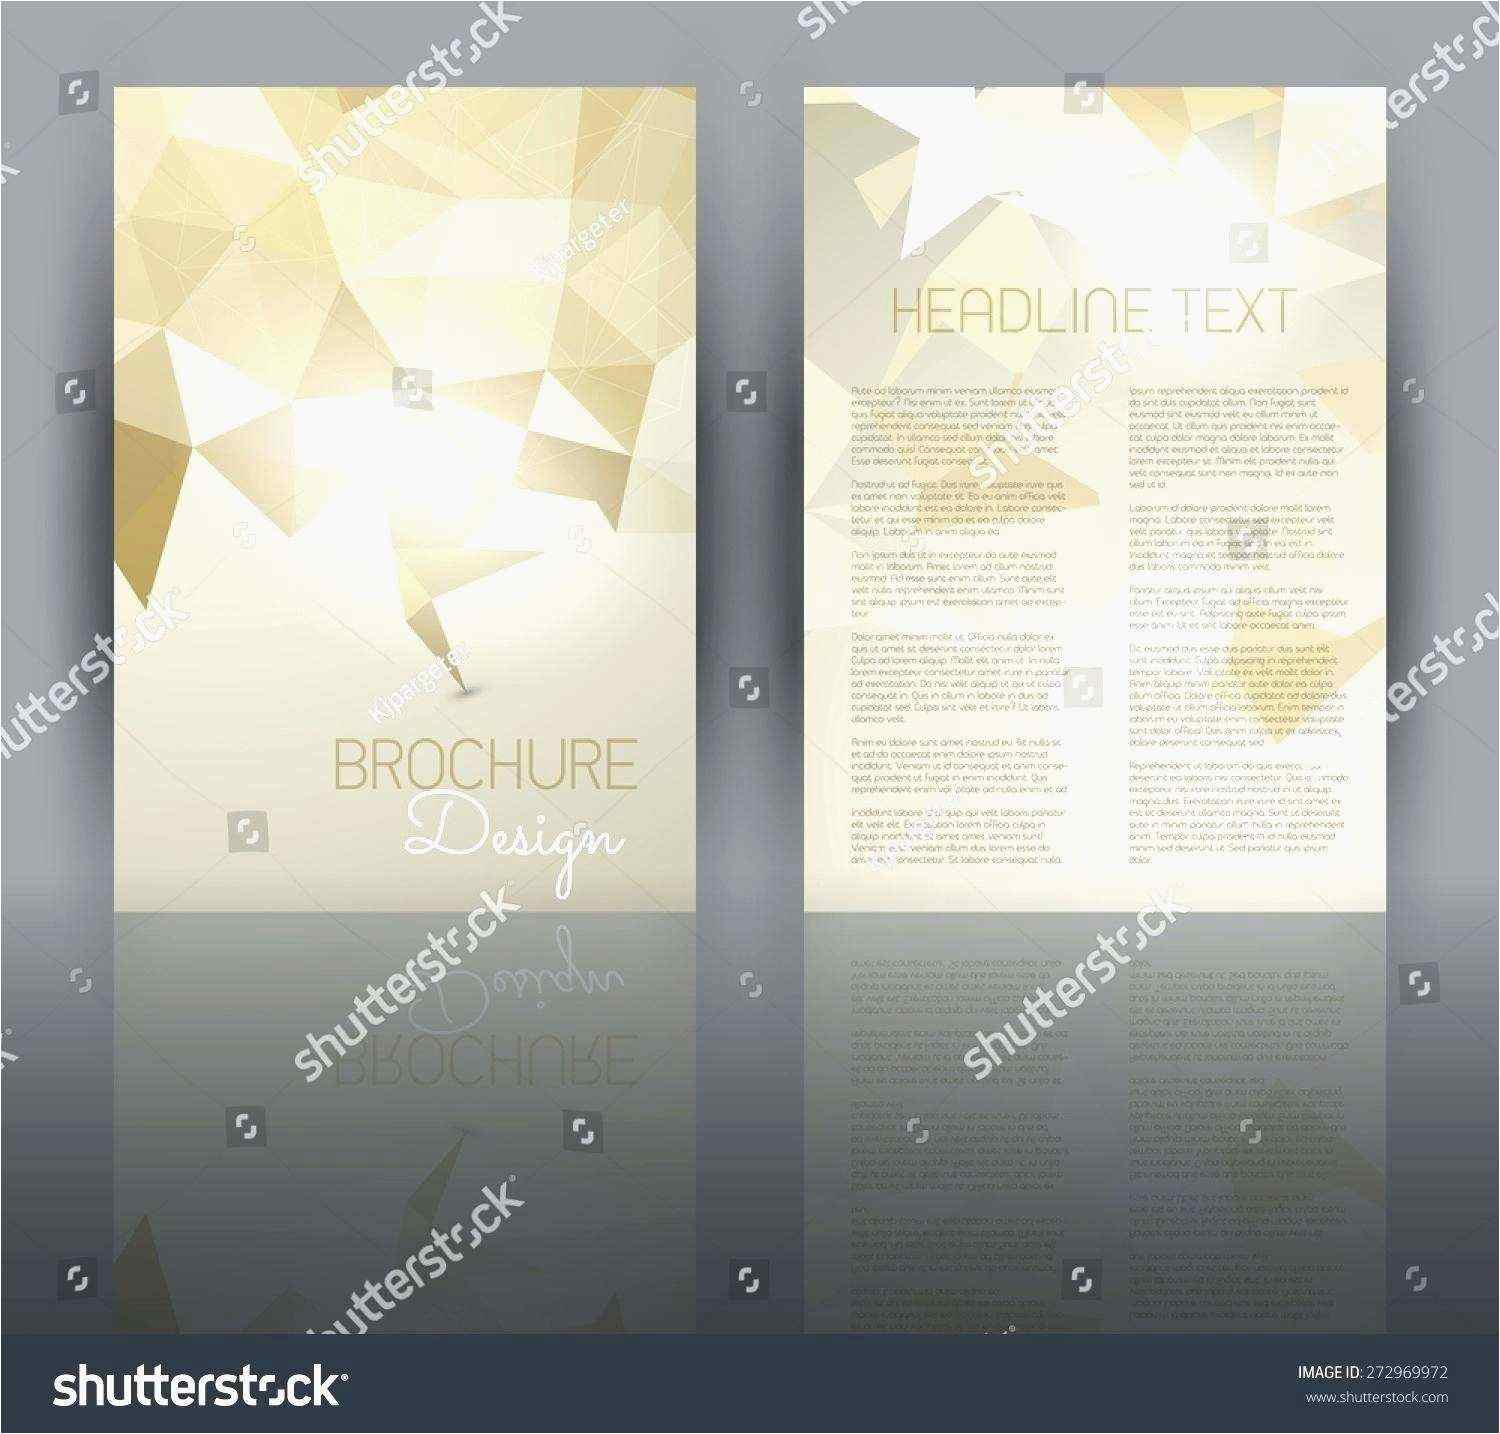 15 Creating Blank Business Card Template Microsoft Word 2007 For Free by Blank Business Card Template Microsoft Word 2007